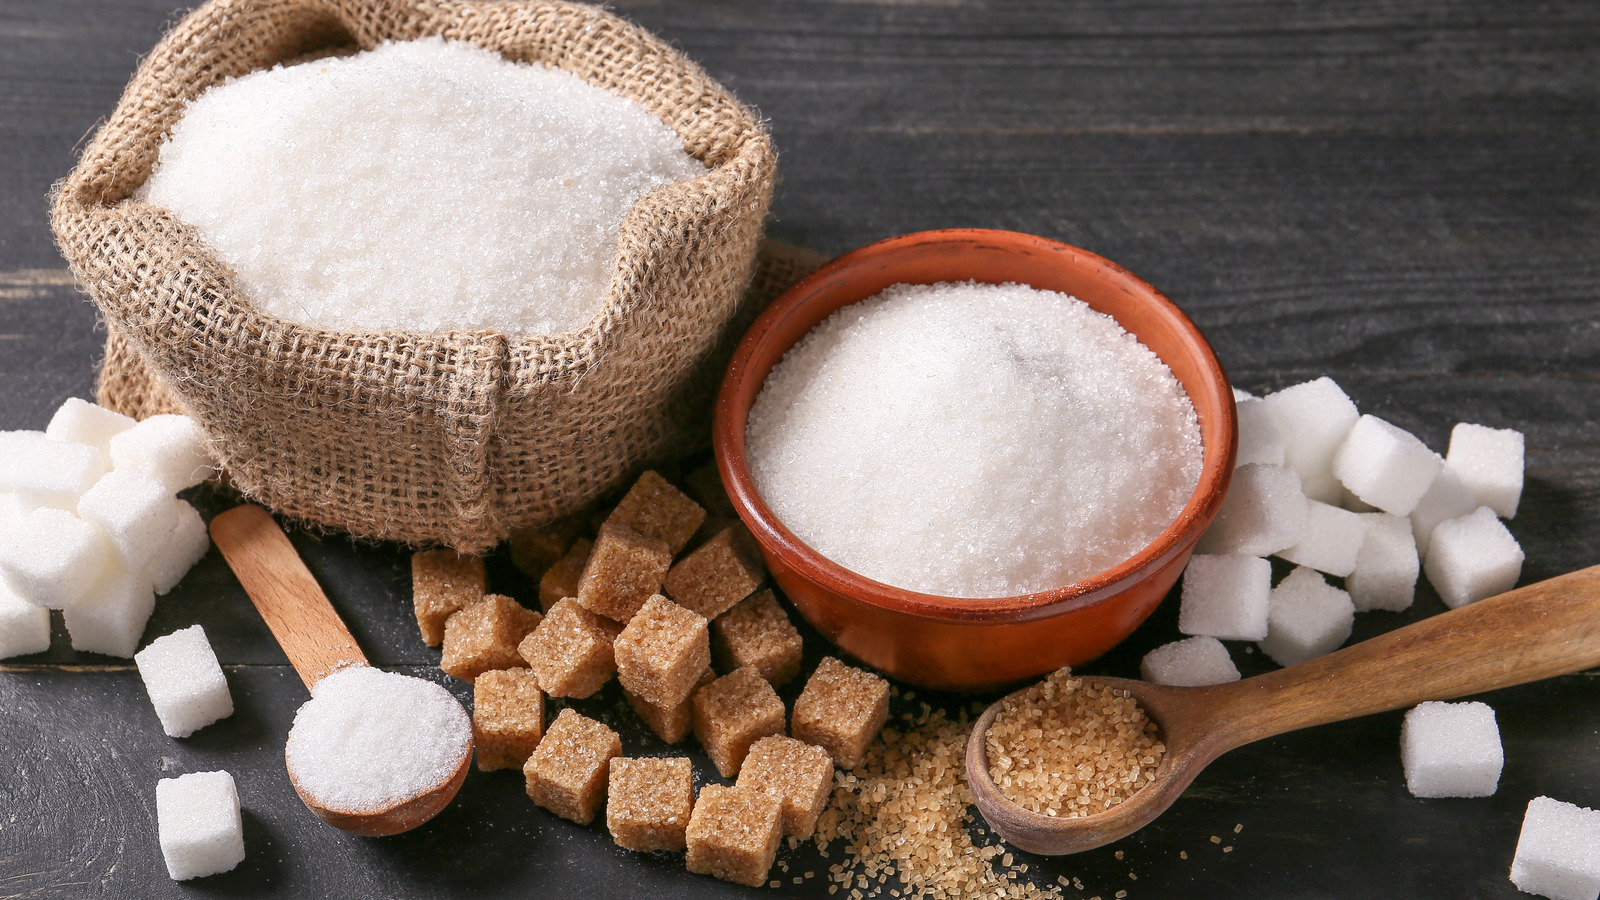 India likely to lose sugar subsidy case in WTO